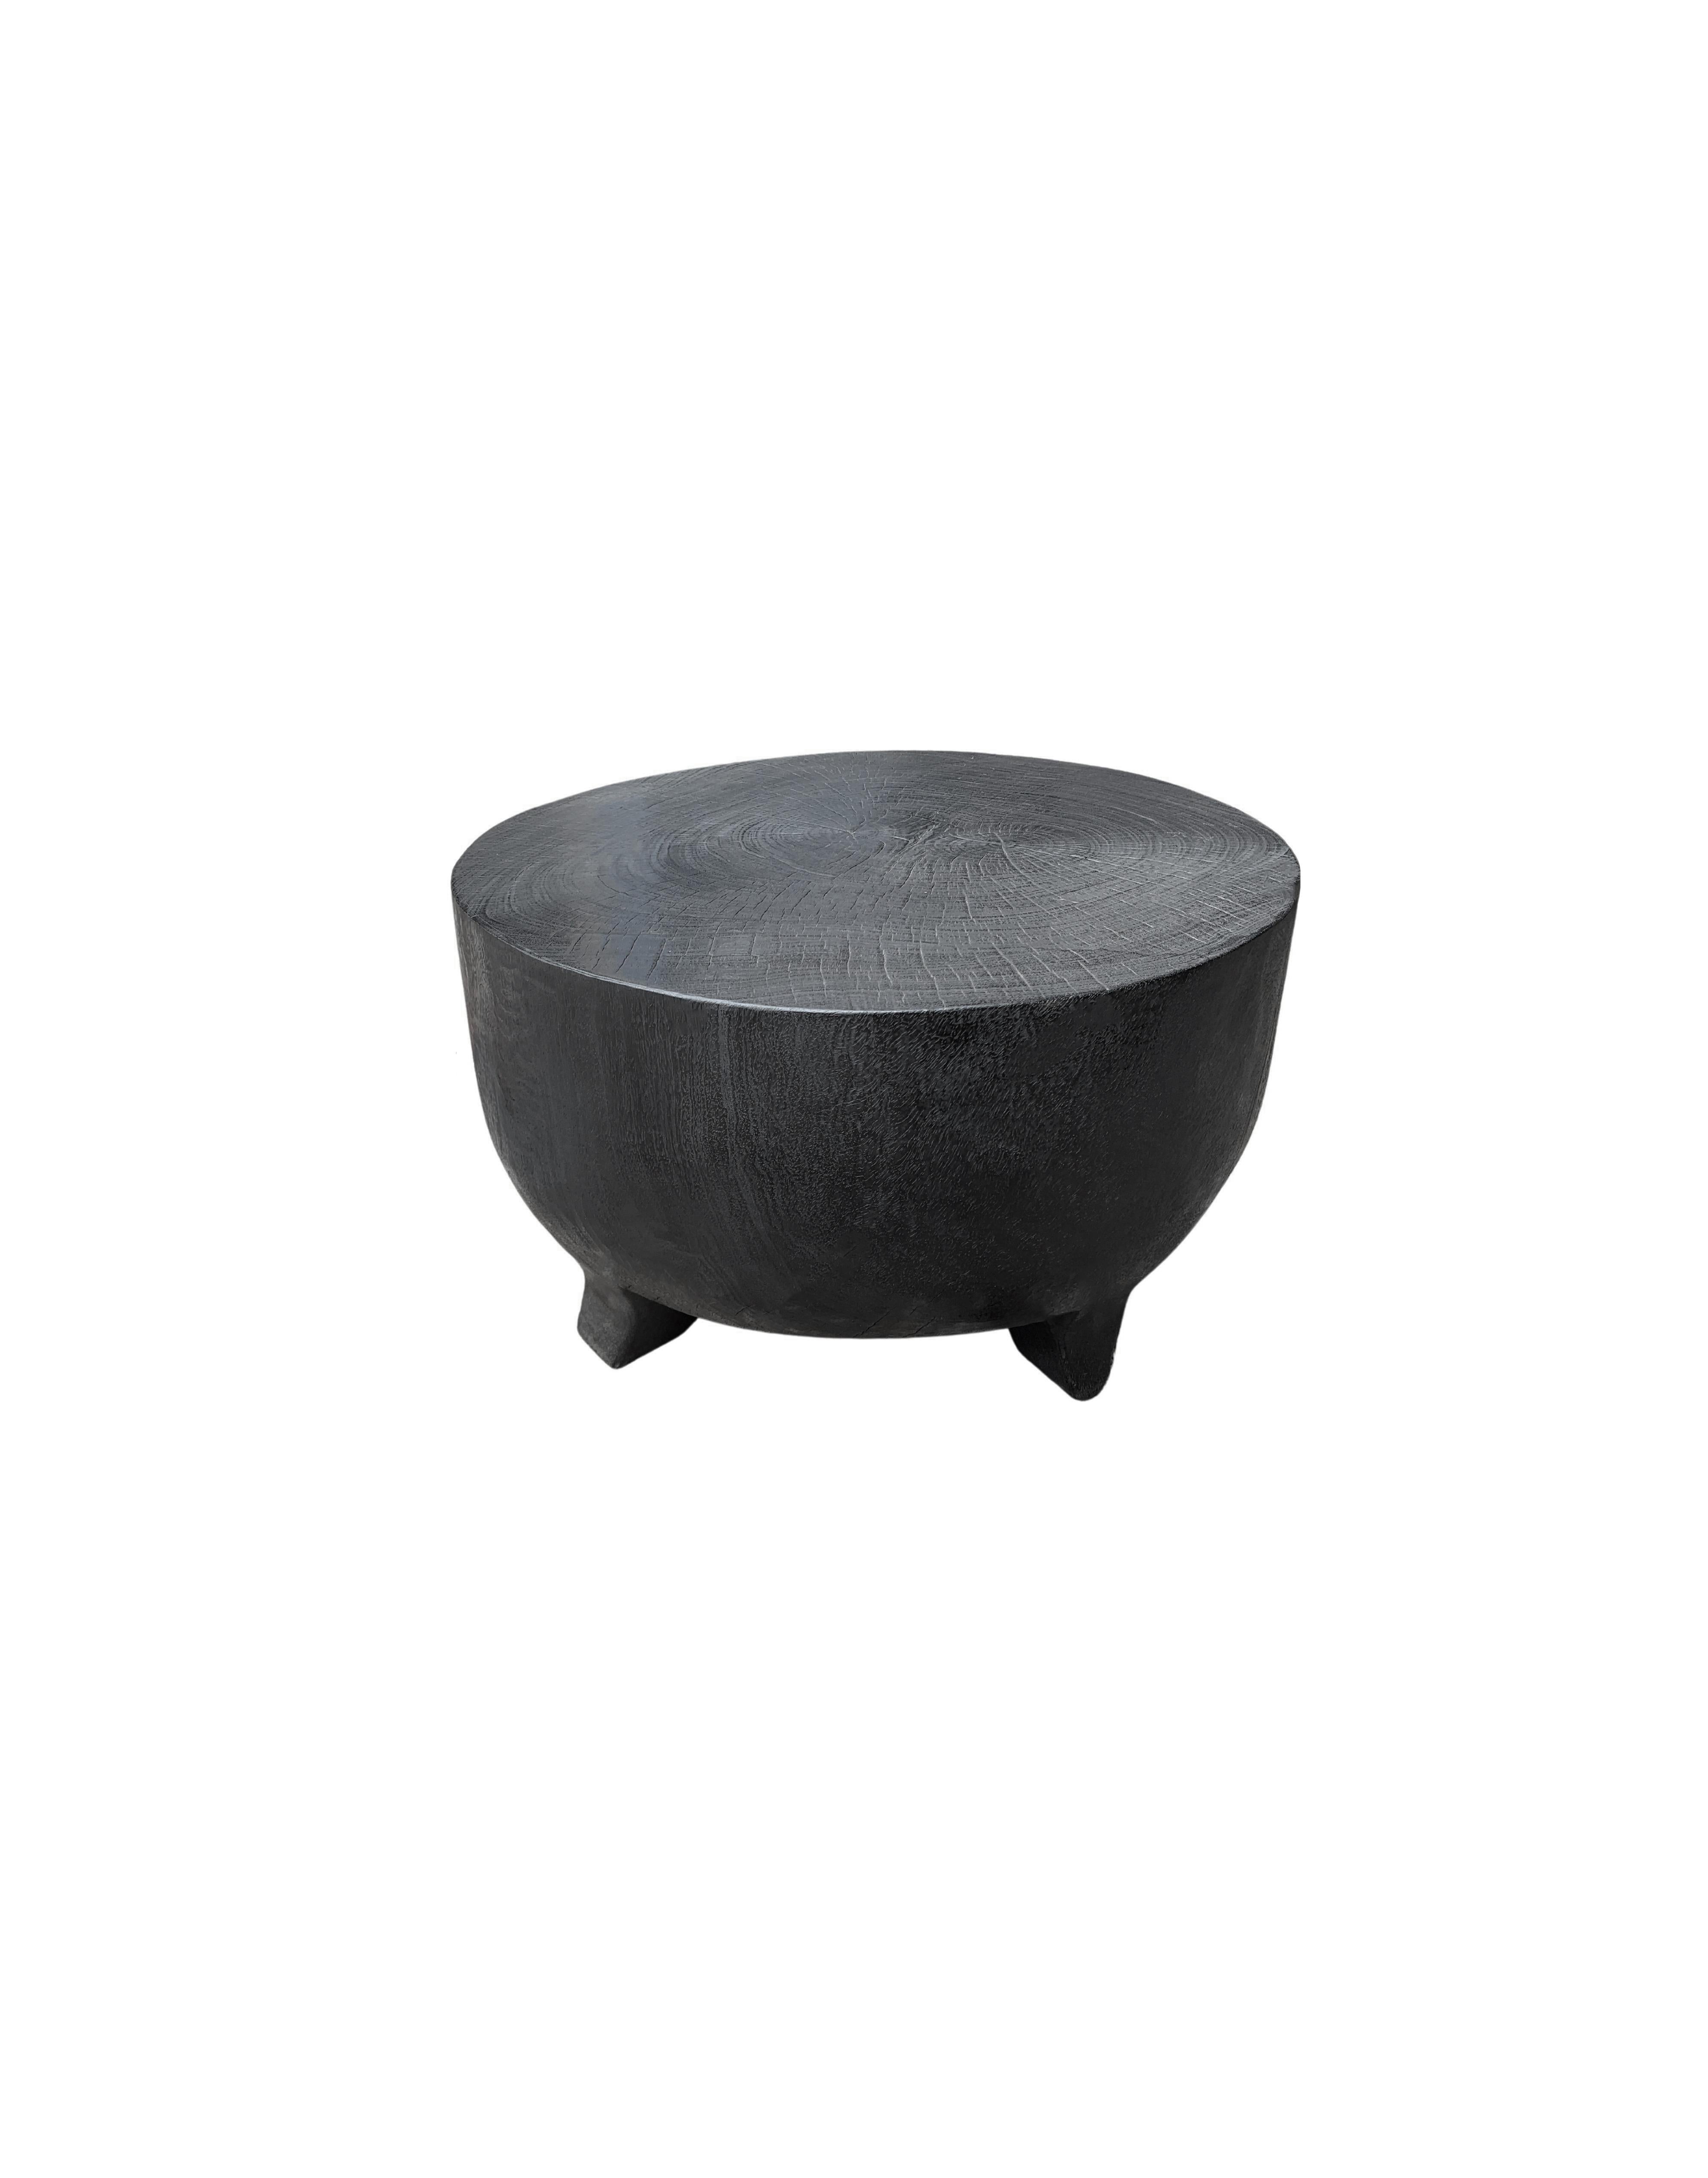 Organic Modern Sculptural Low Side Table Solid Mango Wood Burnt Finish For Sale